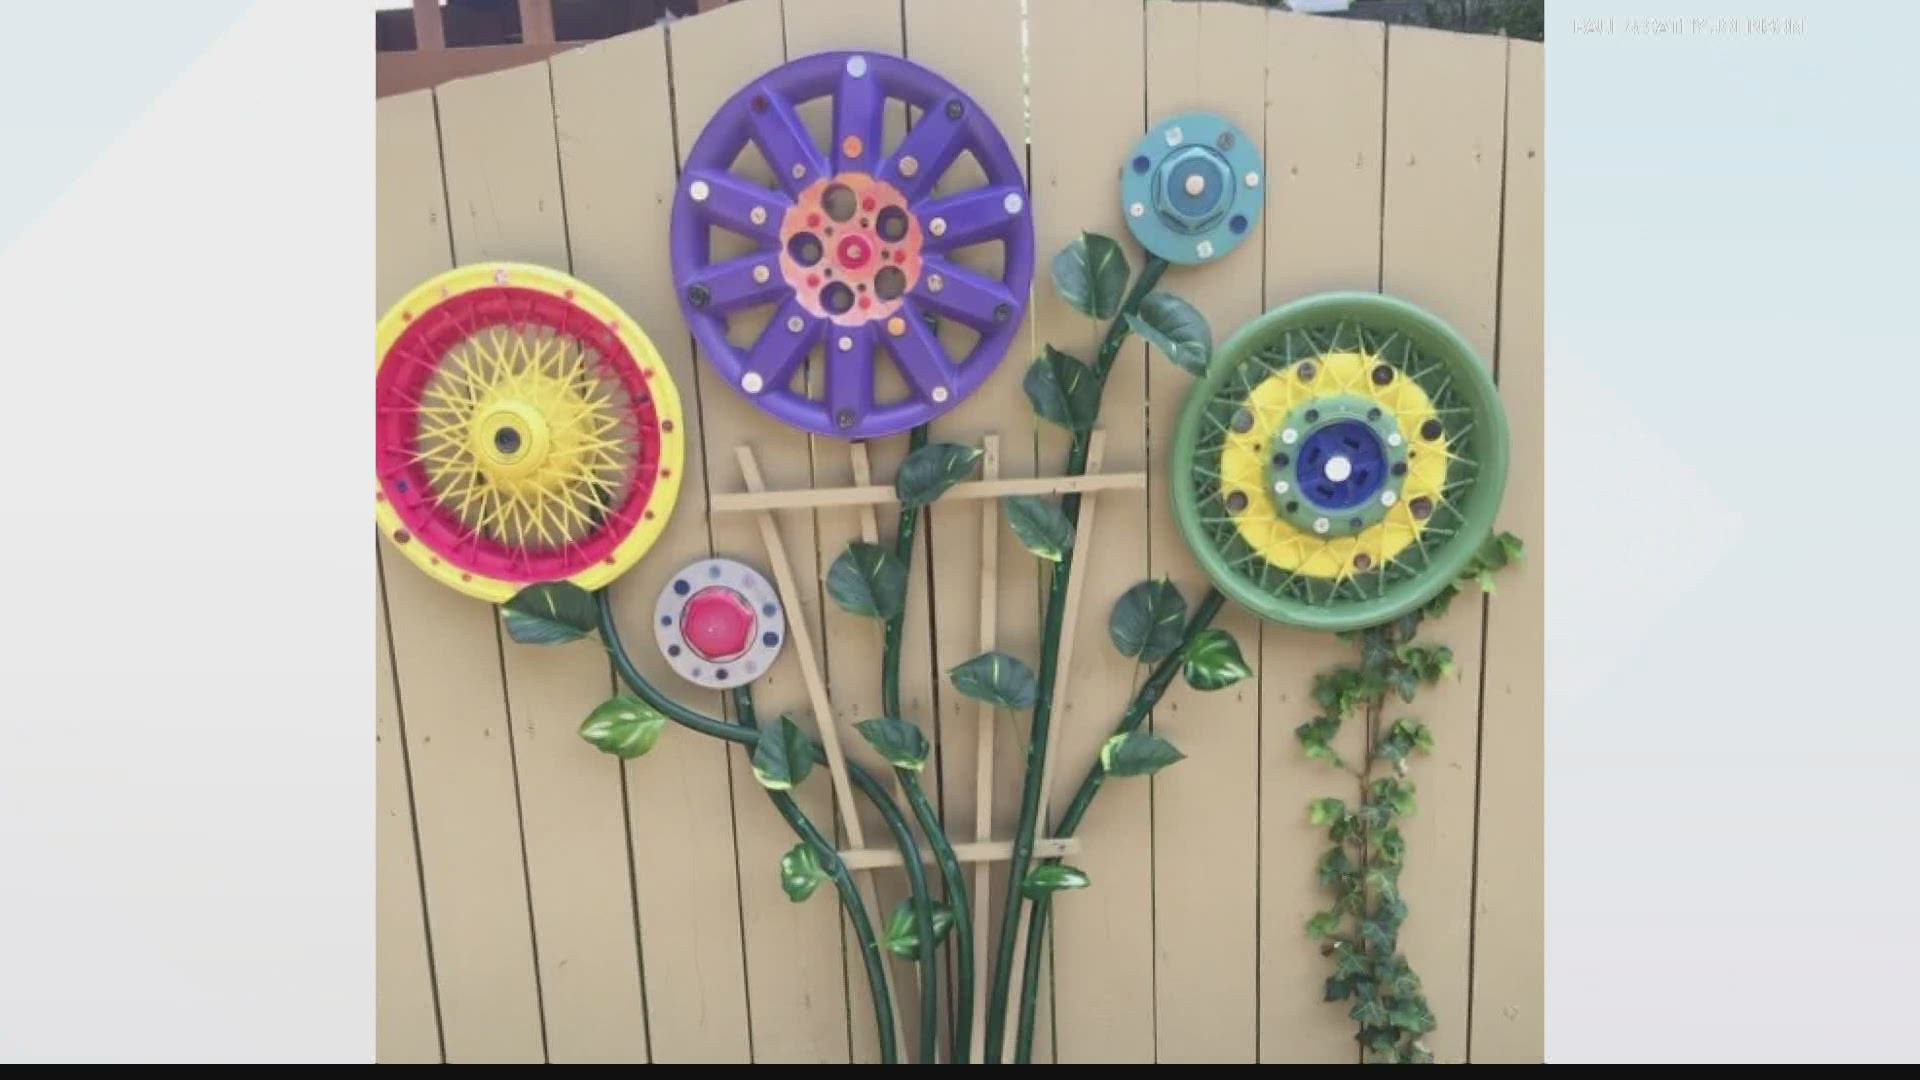 A local family is bringing joy to friends and neighbors with "fence flowers," created with hub caps, buttons and paint.